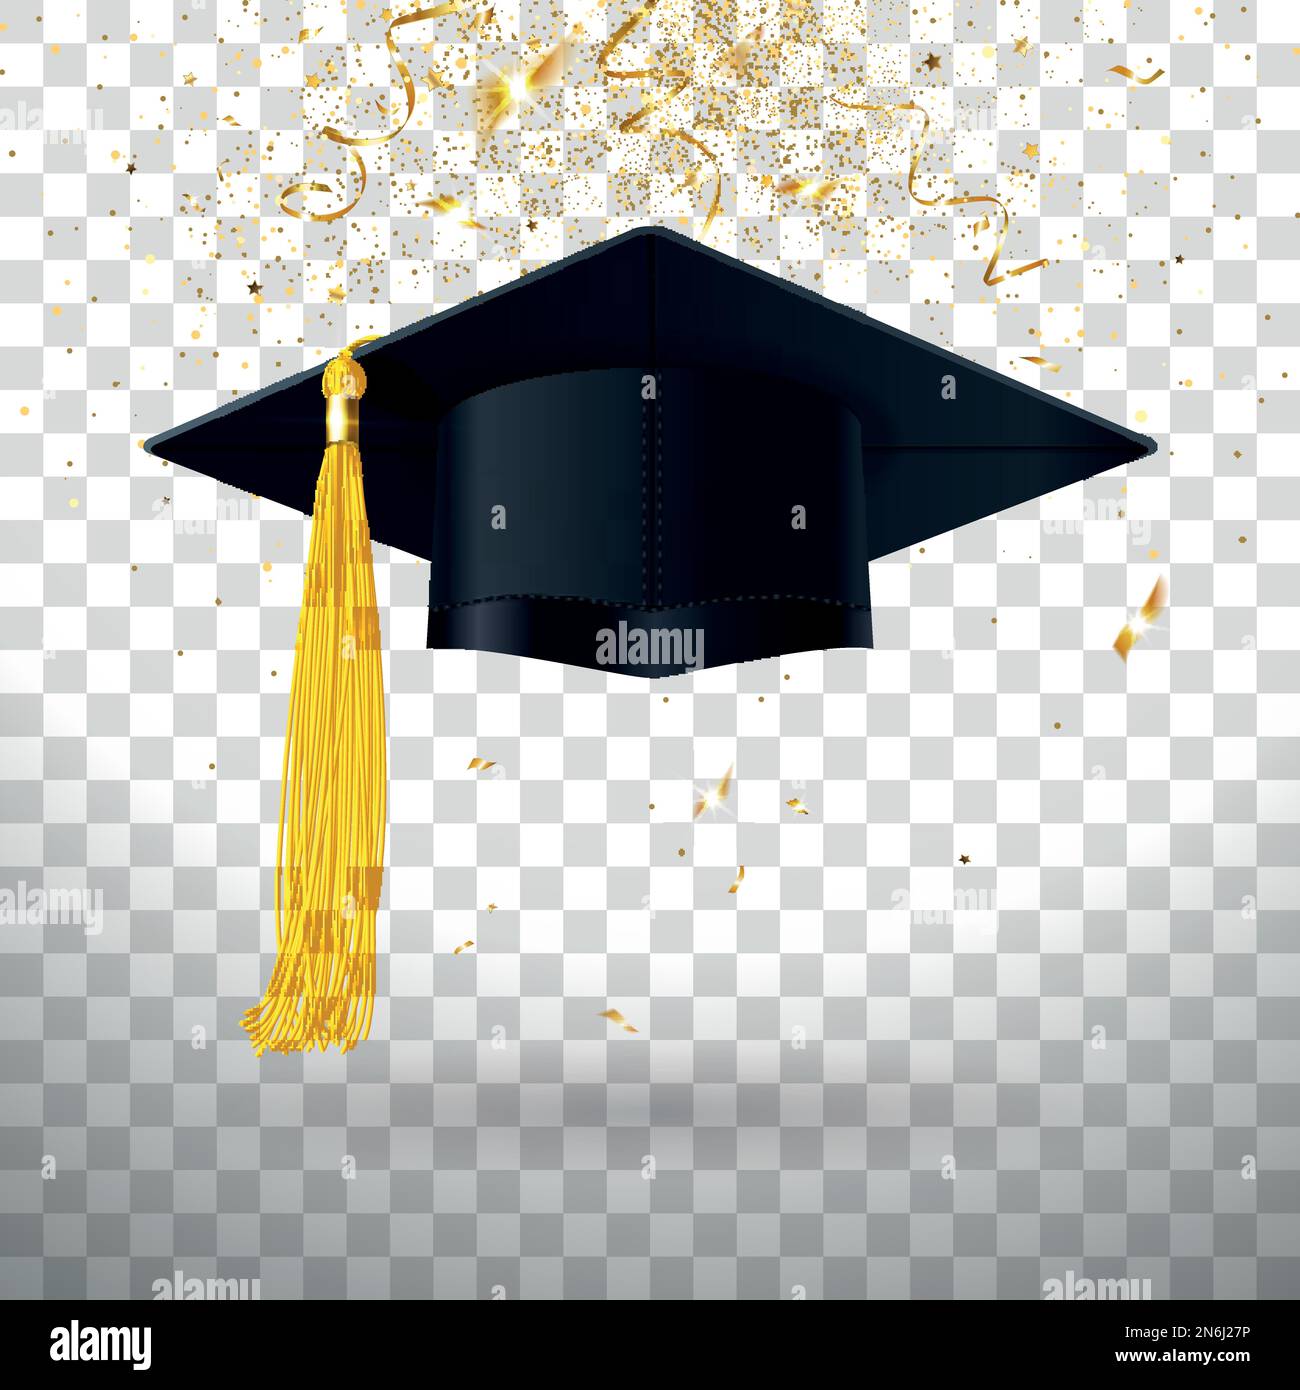 Graduation Caps with Tassels Graduation Ceremony Party Supplies Graduation  Hat Photo Props for Students (Yellow Tassels)